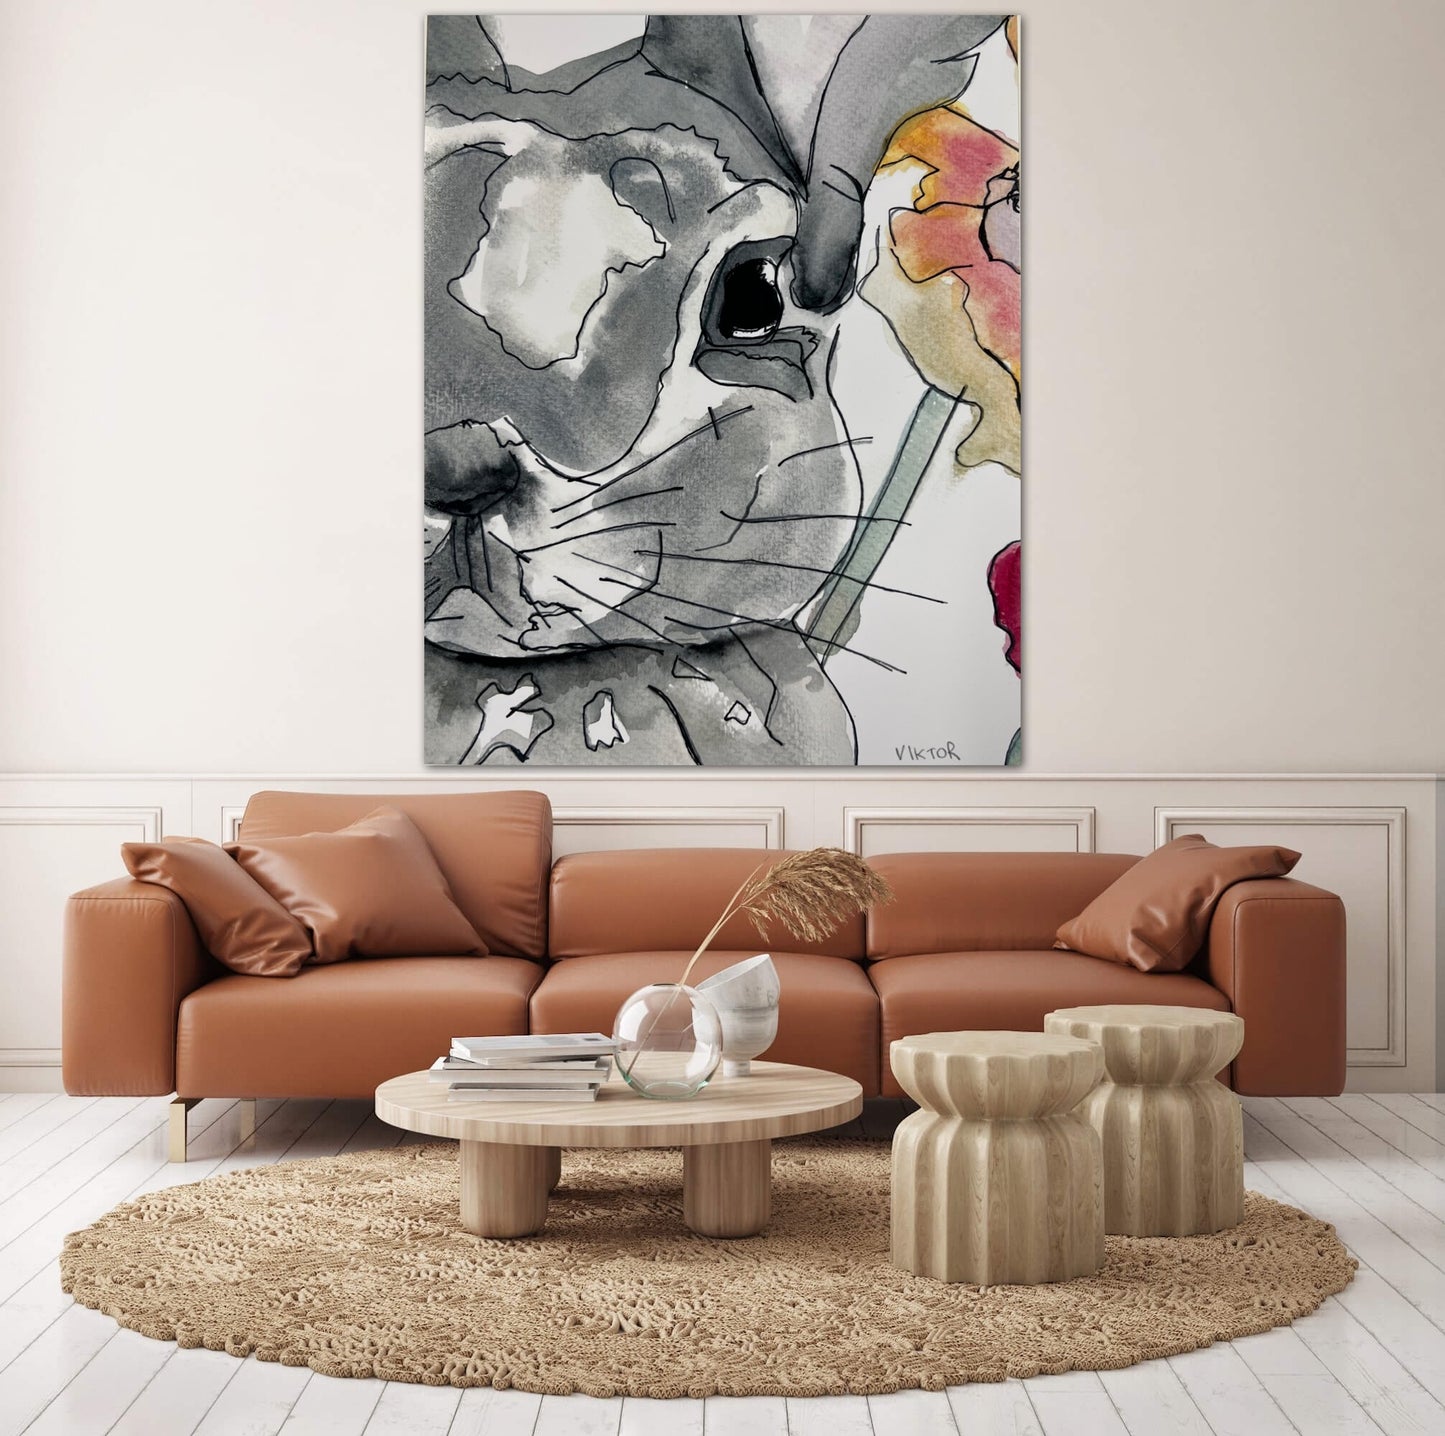 Rabbit Collection 4 (half face) - Print, Poster and Stretched Canvas Print